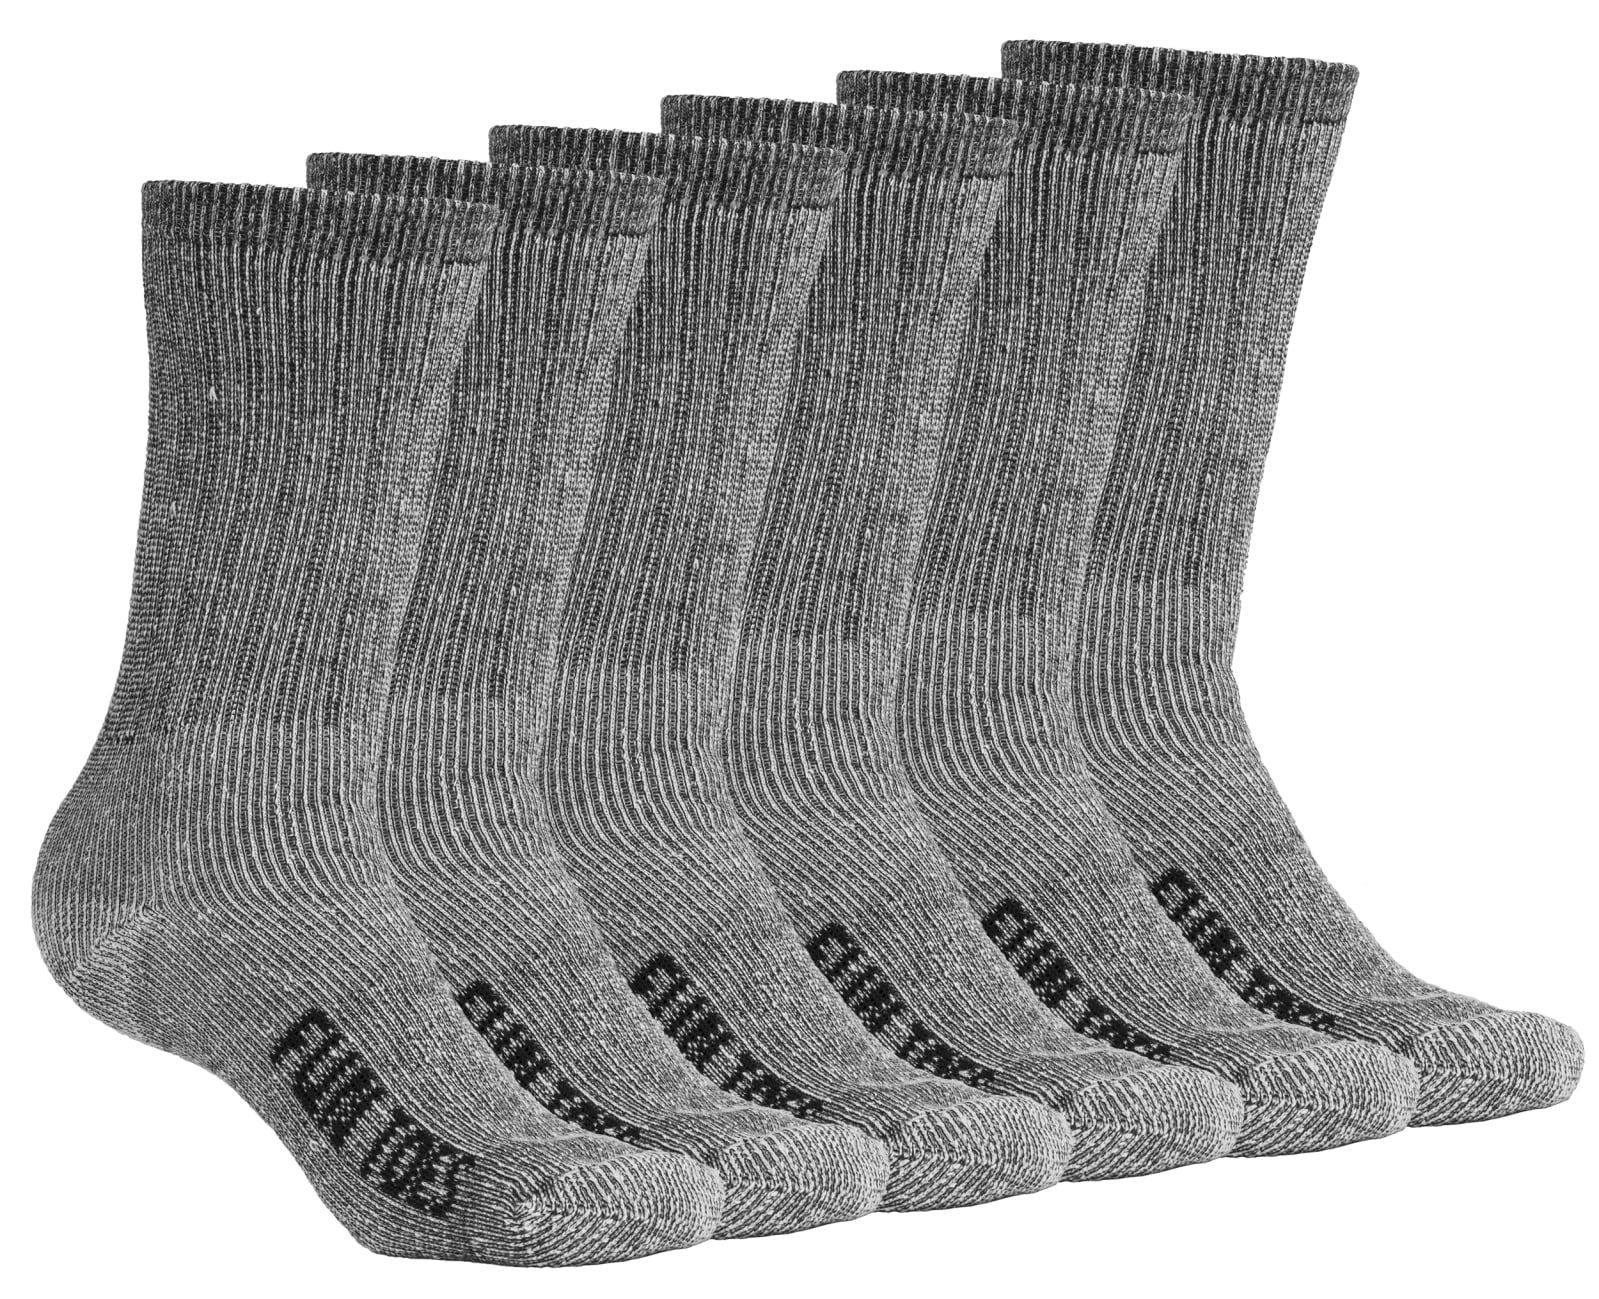 YUEDGE Men's Breathable Thick Cushion Cotton Calf Socks Thermal Athletic Sports Walking Hiking Socks Boot Socks for Men Size 6-13